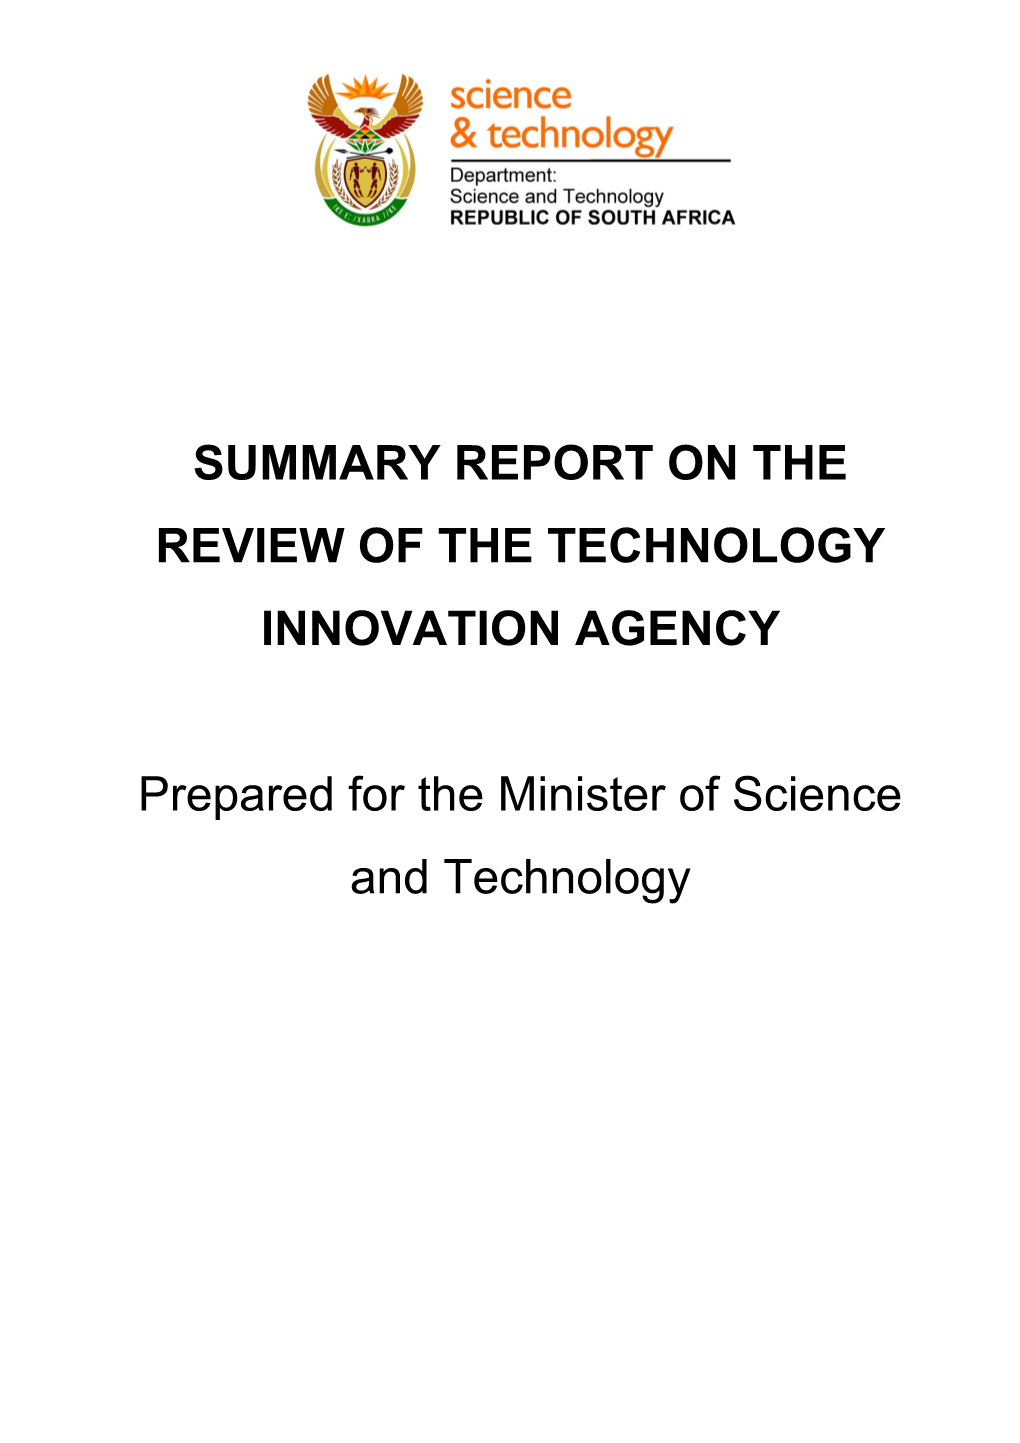 Review of the Technology Innovation Agency